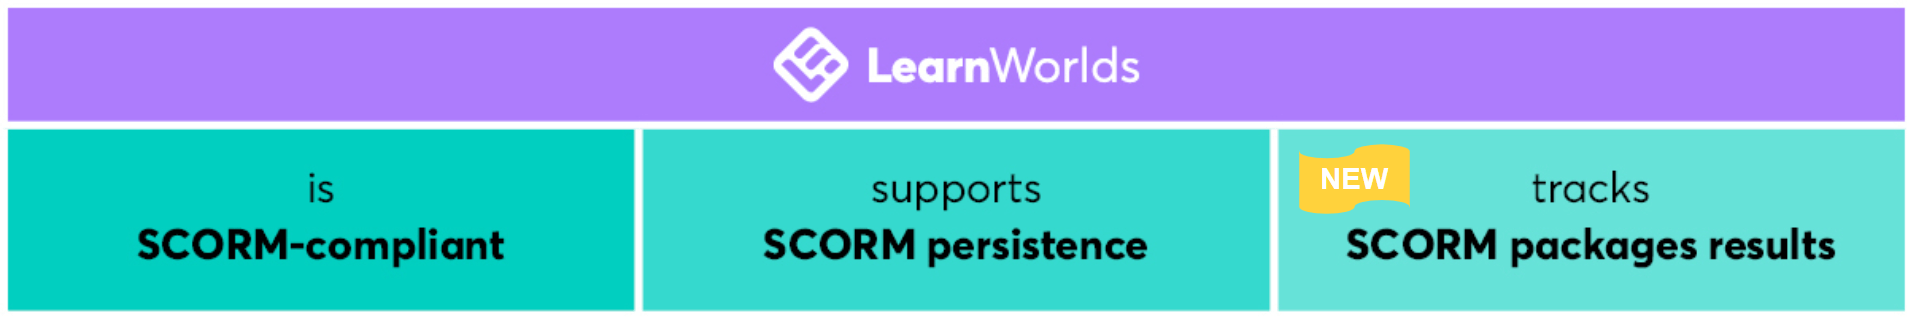 LearnWorlds is scorm-compliant, scorm persistence and tracks scores.